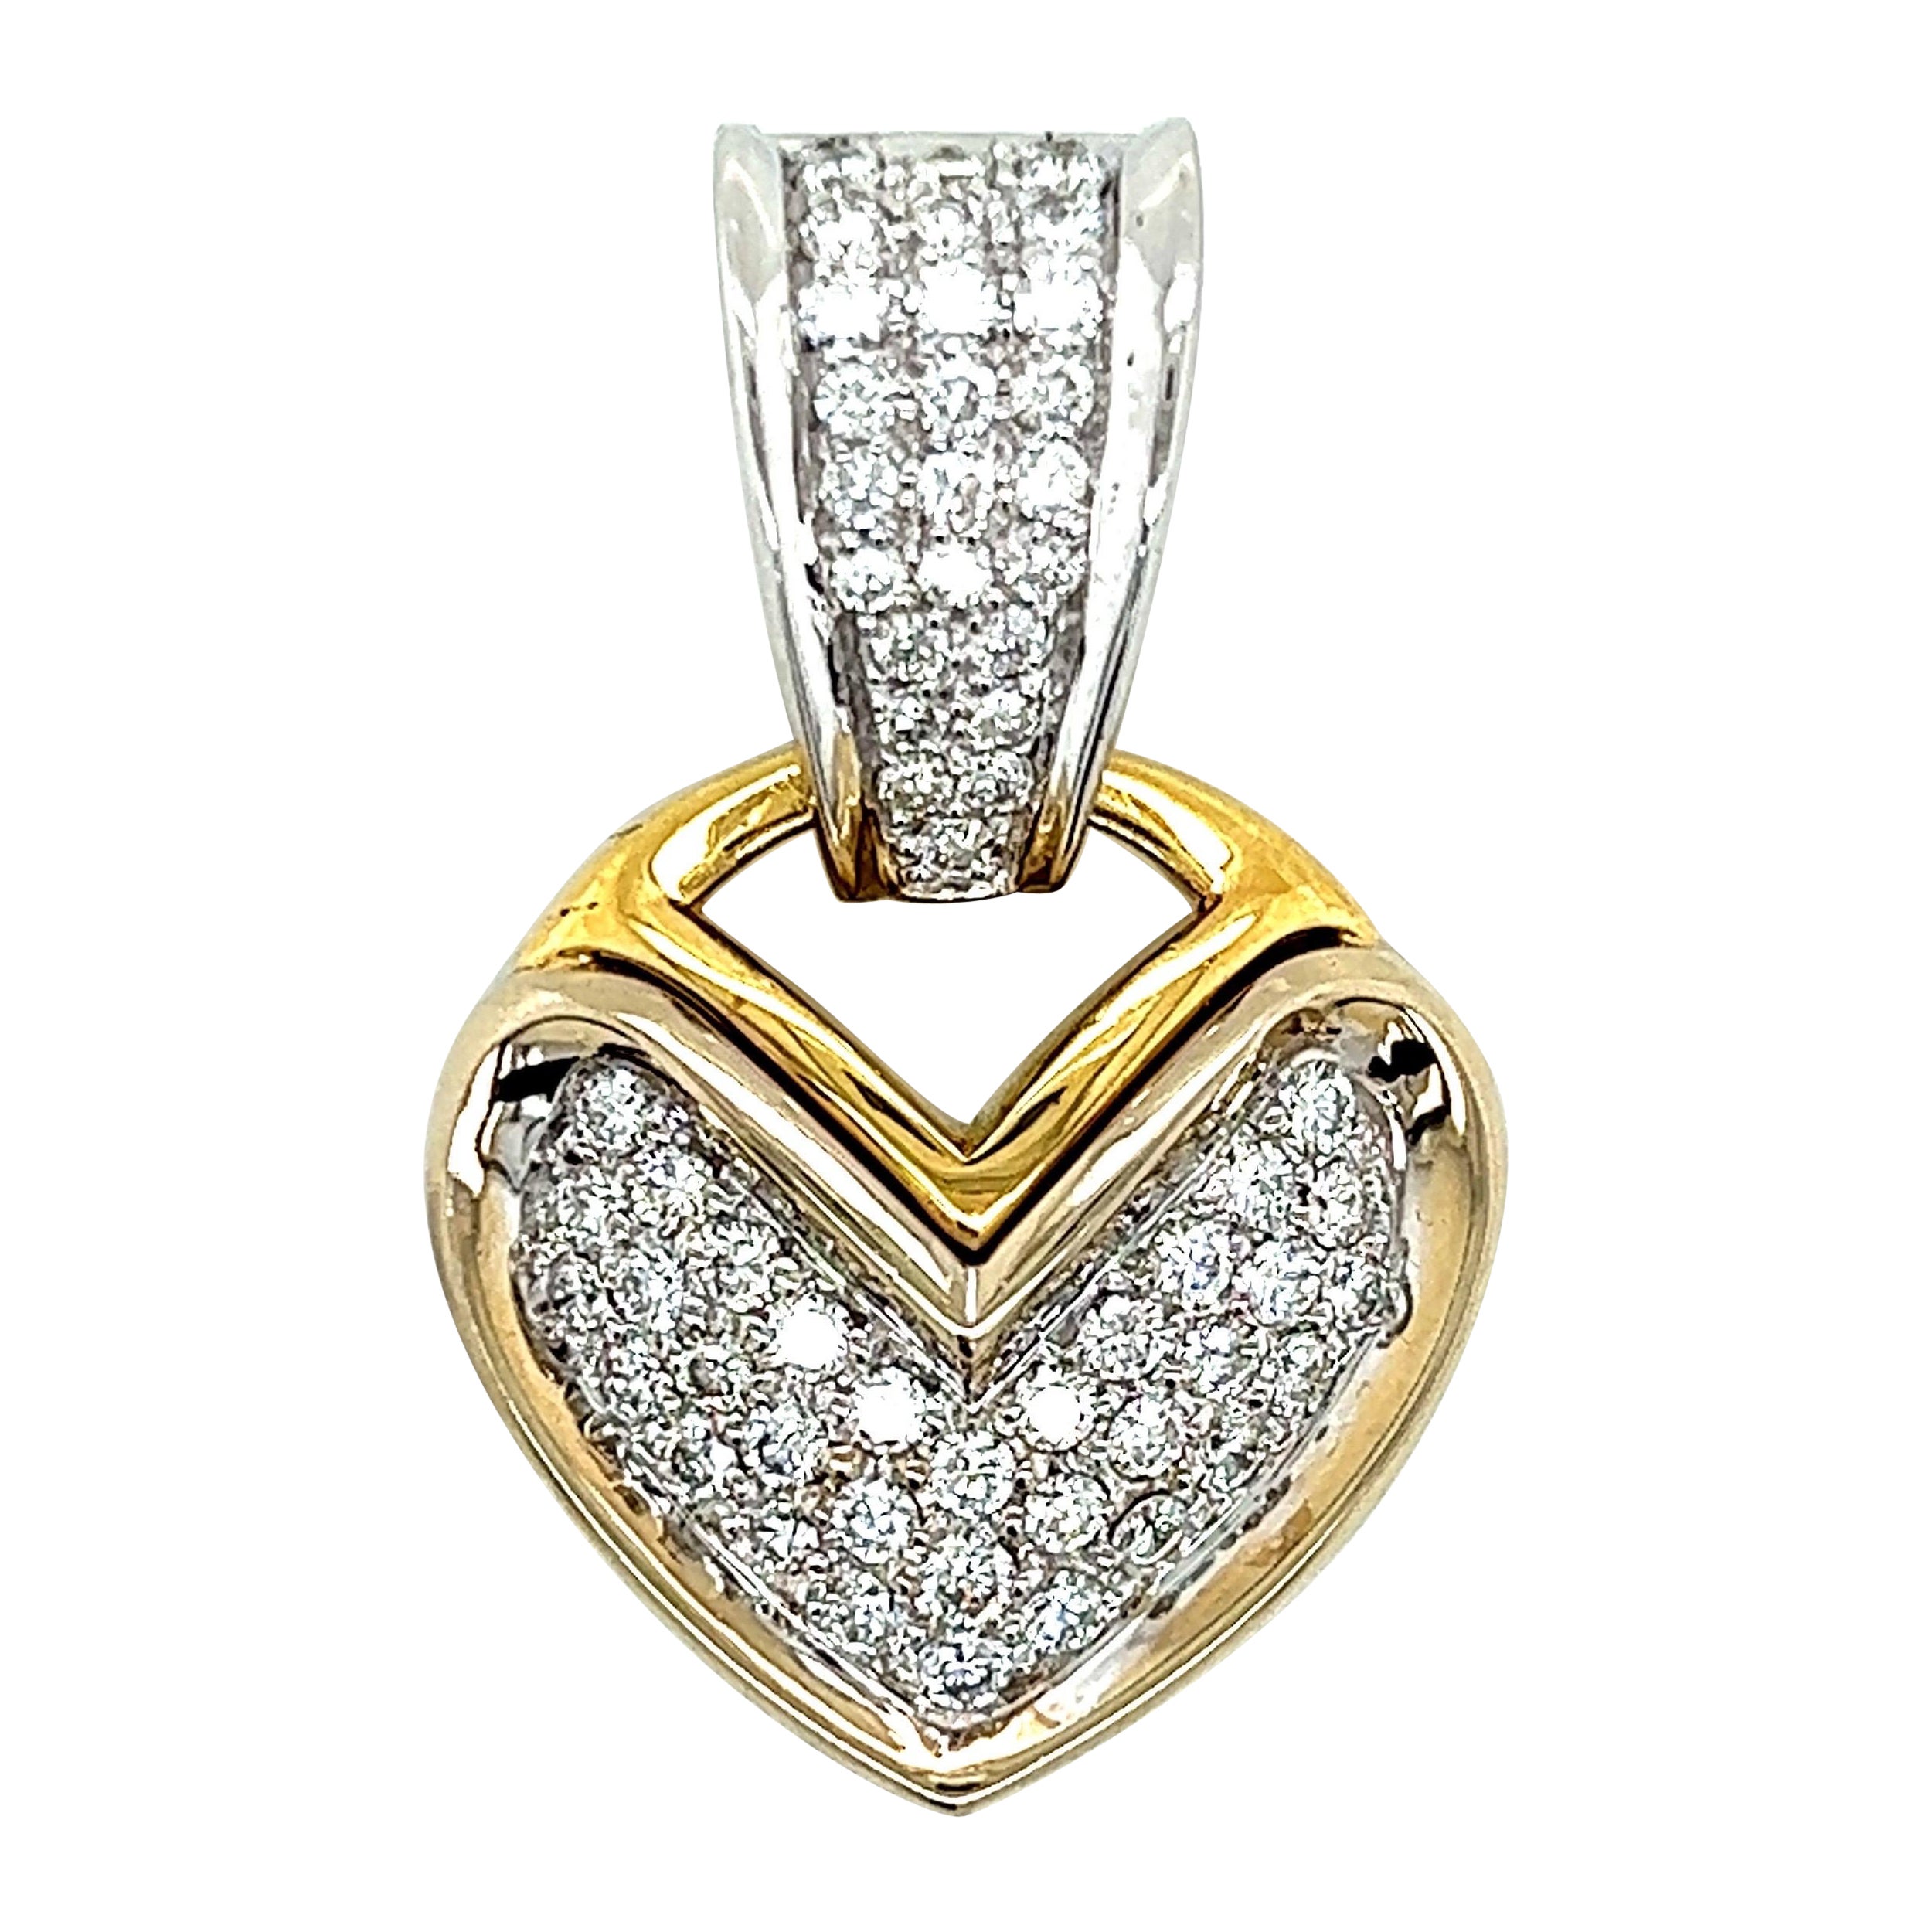 18k White and Yellow Gold Heart Pendant with White Diamonds